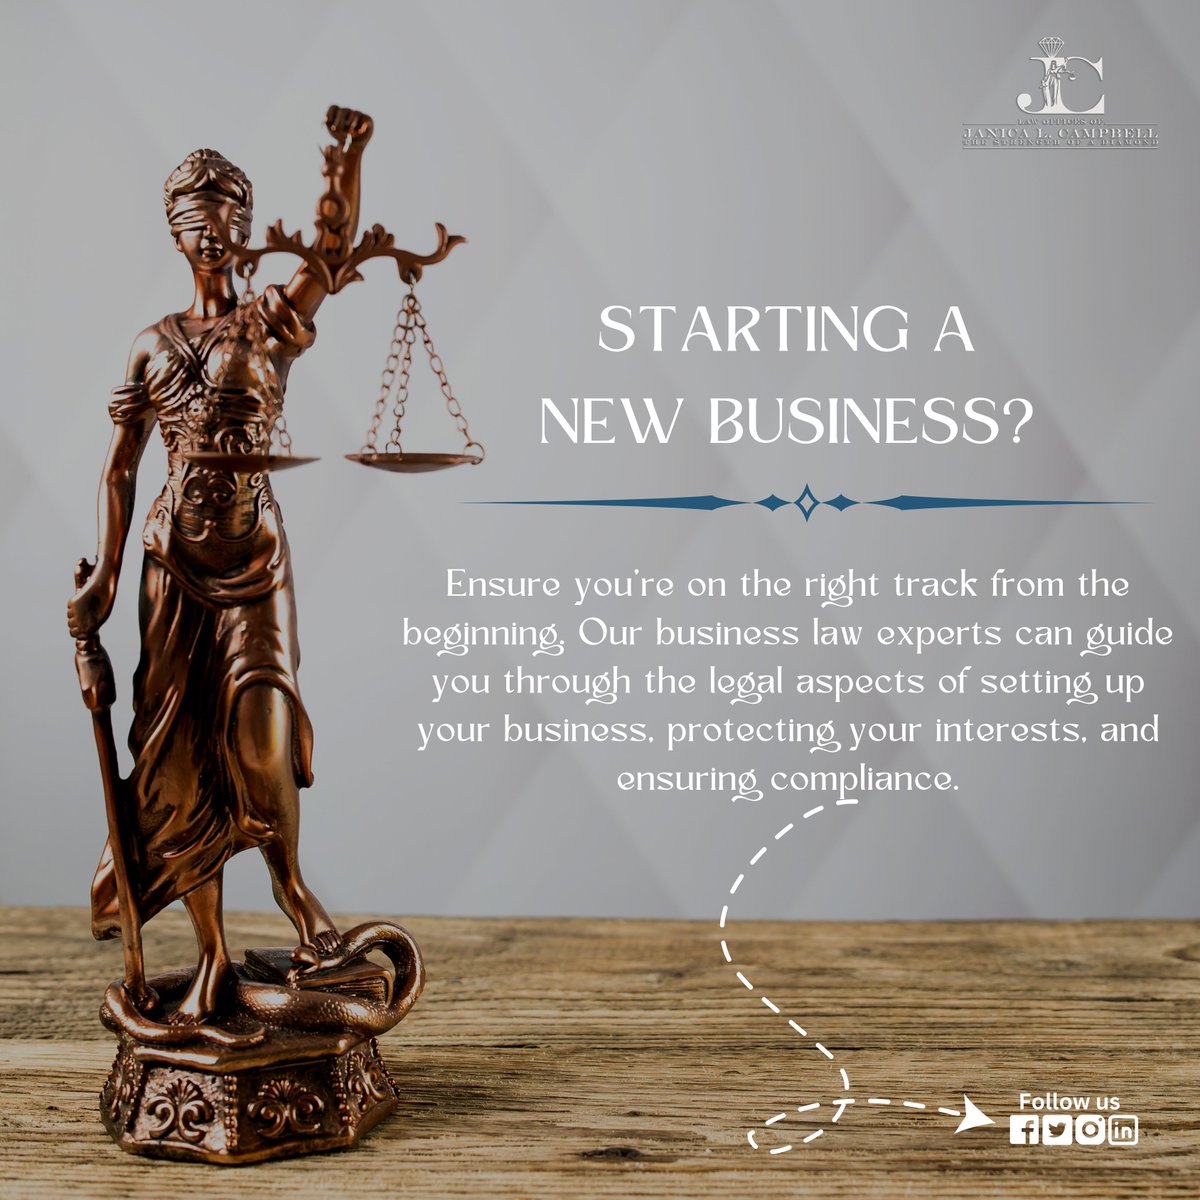 Ensure you're on the right track from the beginning. 🚀 Our business law experts can guide you through the legal aspects of setting up your business, protecting your interests, and ensuring compliance. 📚💼📝

👉 Follow us @janica_law
.
#BusinessLaw #LegalAdvice #Entrepreneurship